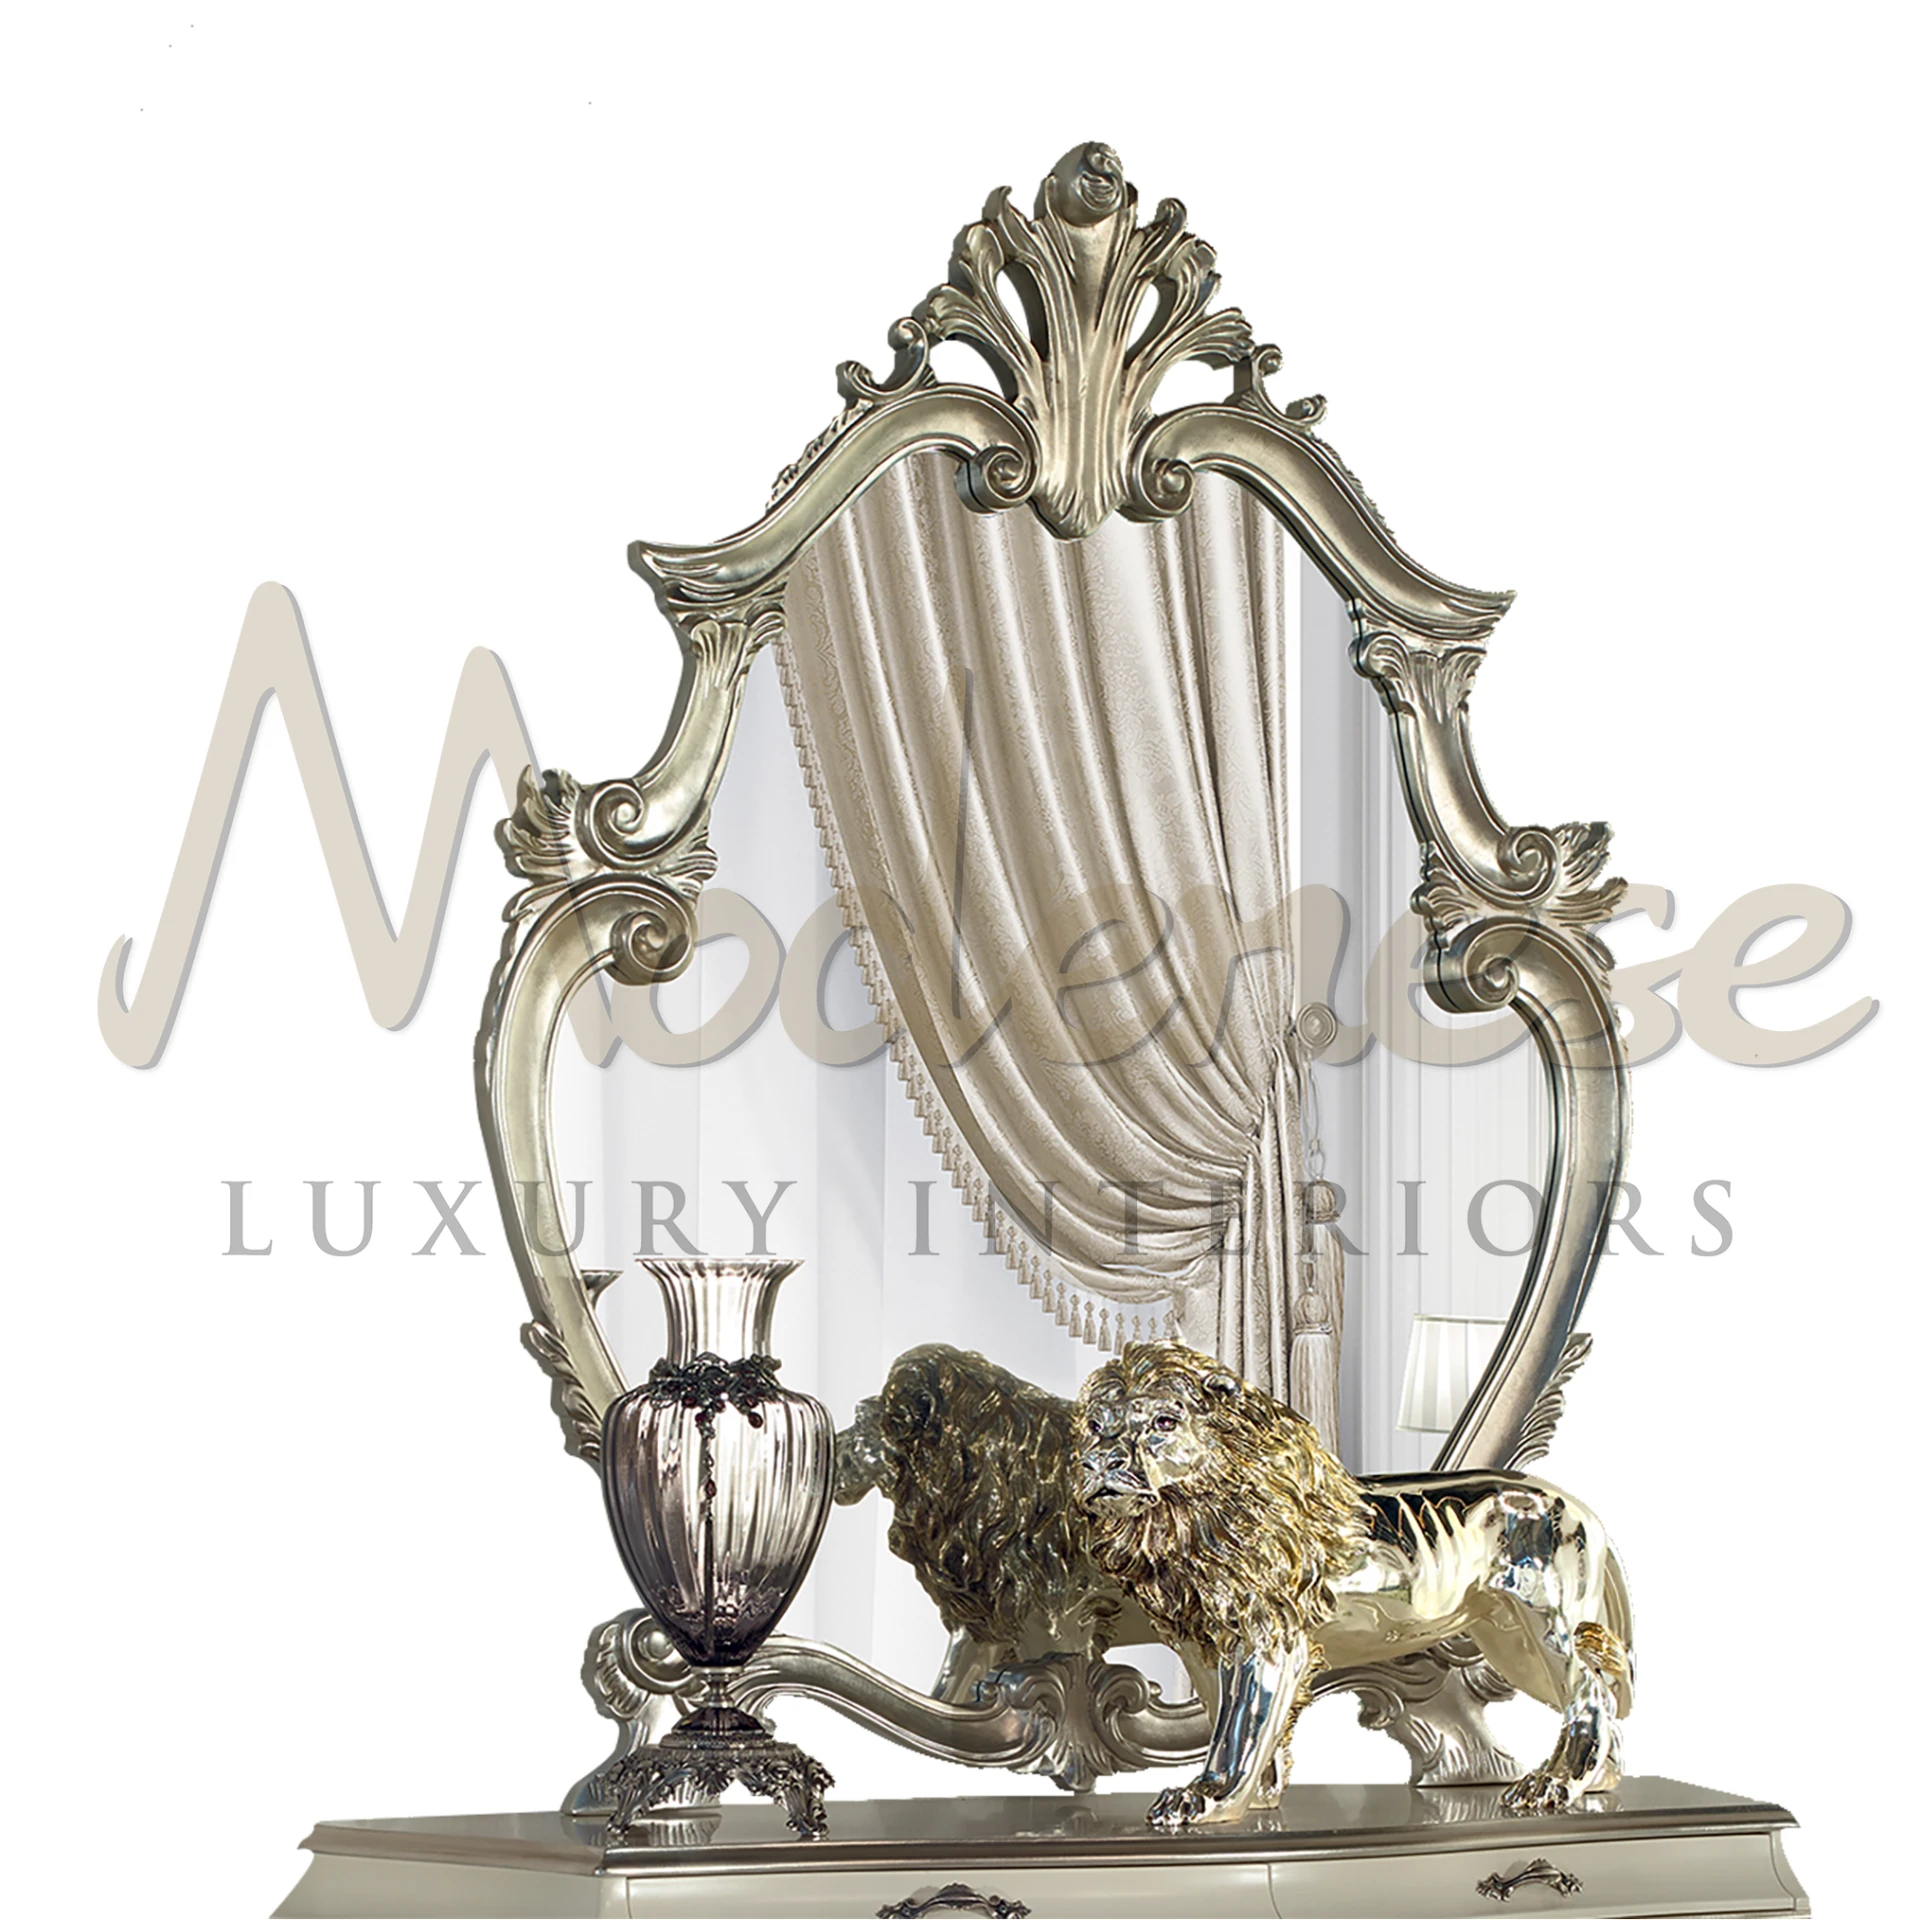 Silver Leaf Figured Mirror, with a unique shape and shimmering finish, for a luxurious and classic interior touch.